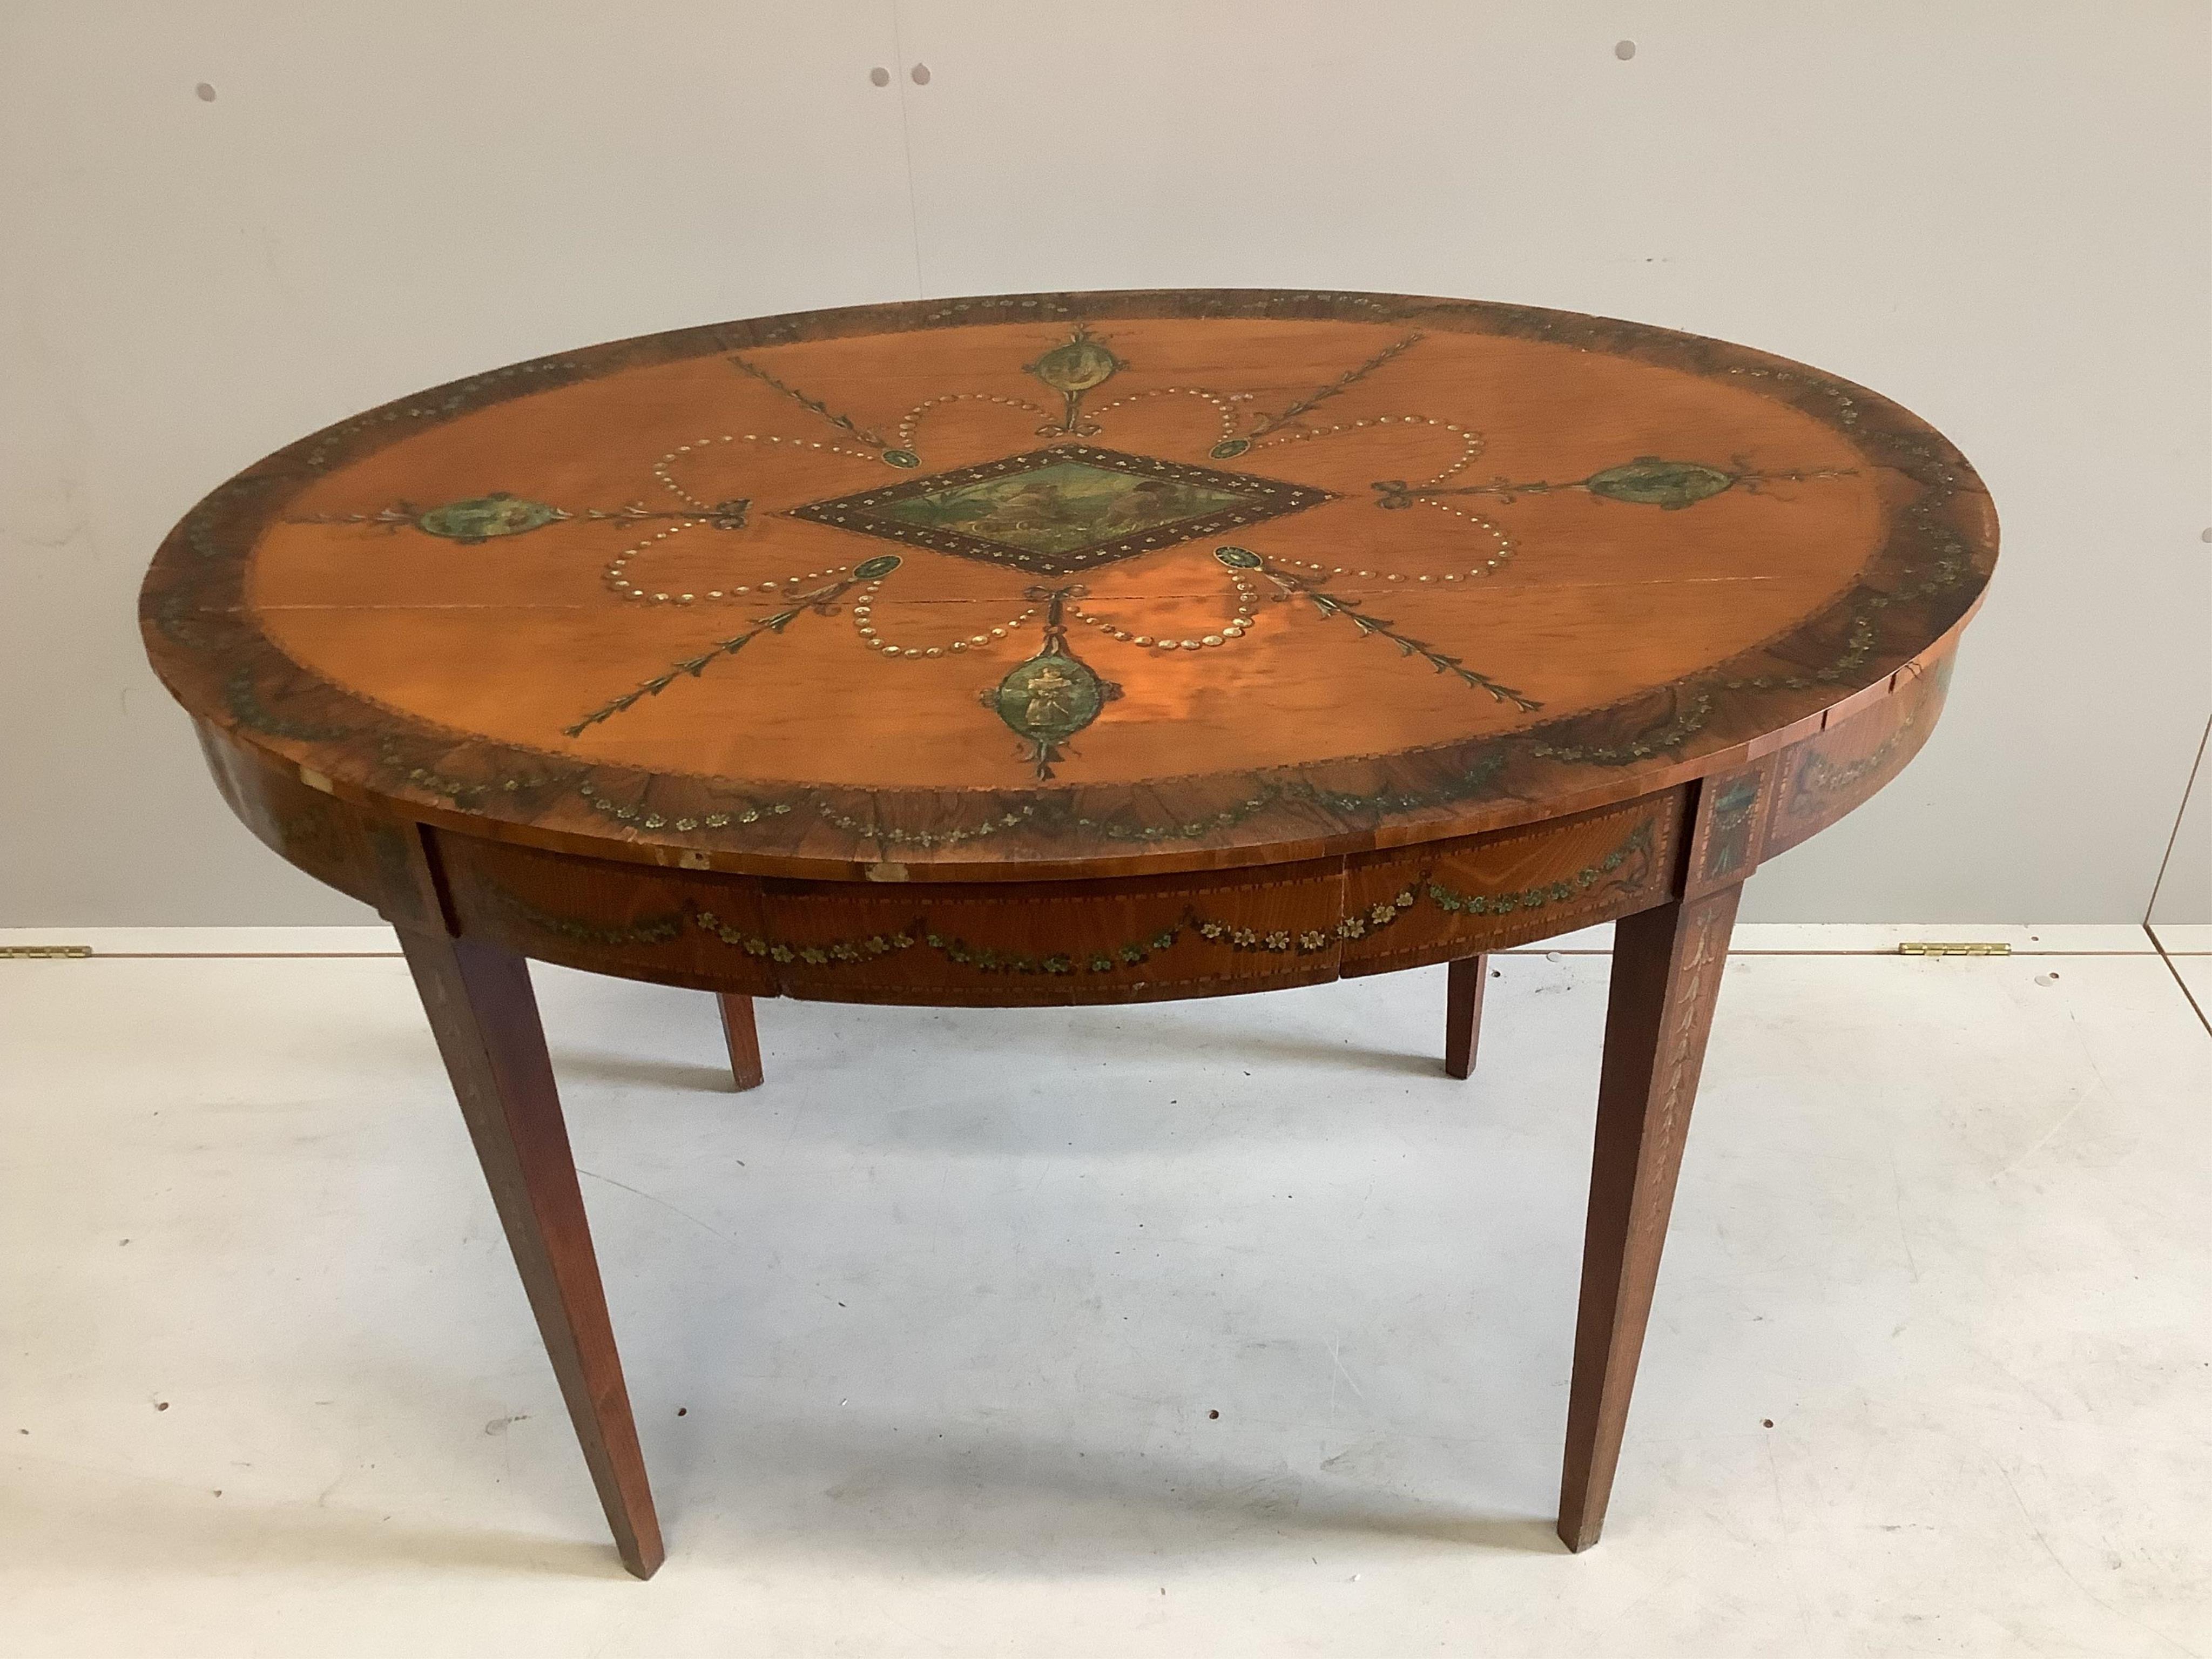 An Edwardian Sheraton revival painted satinwood oval centre table, width 117cm, depth 80cm, height 74cm. Condition - poor